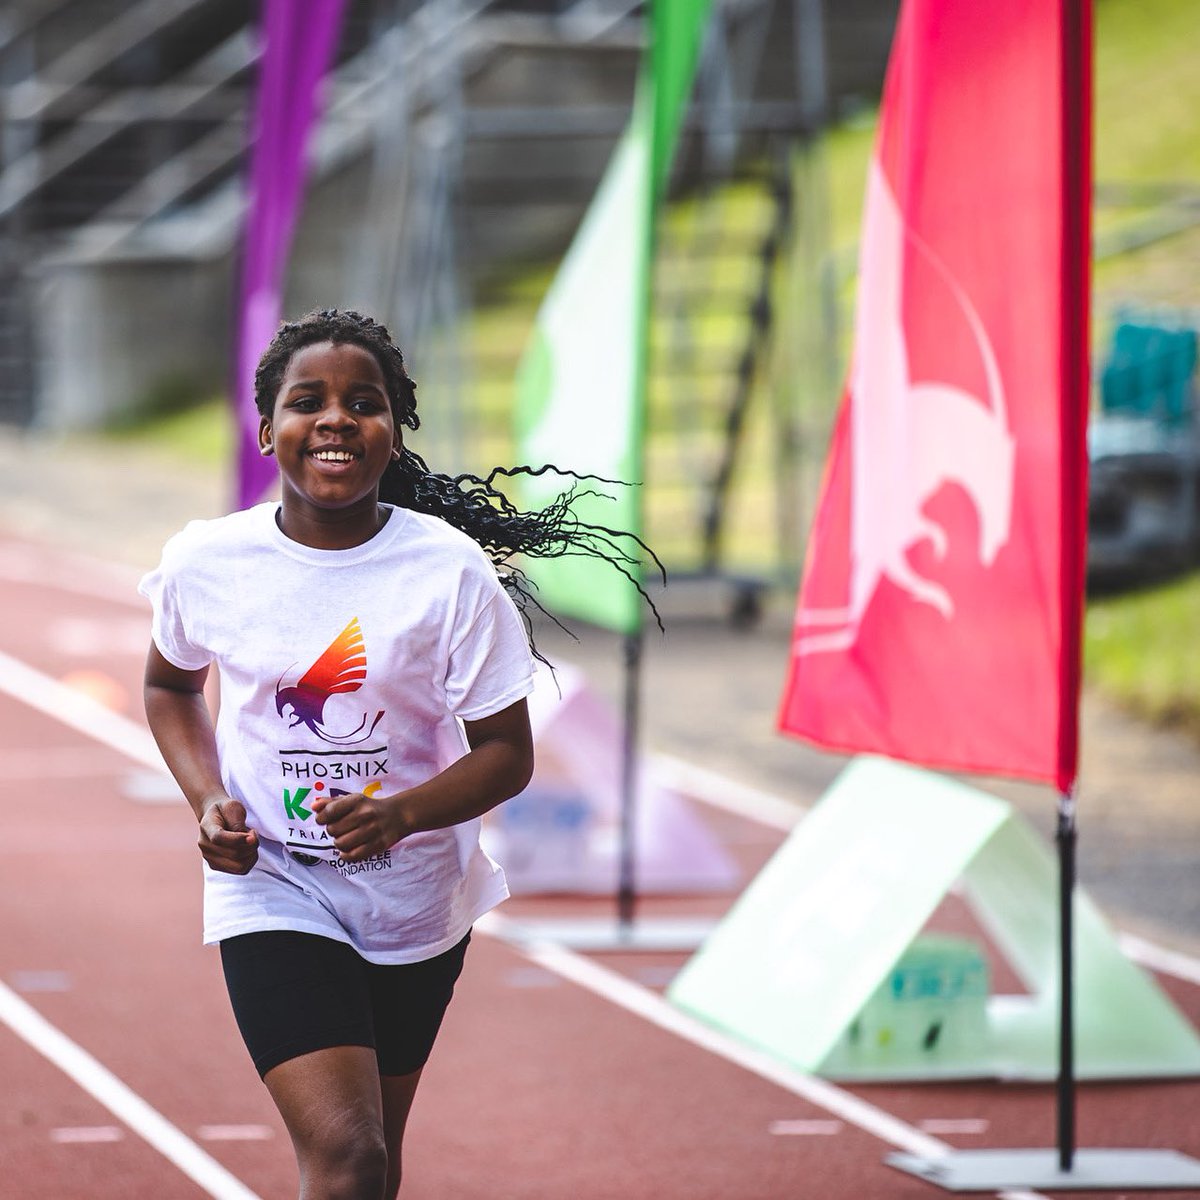 Big smiles from us today as we’ve just opened registrations for our first five events of the year! 😄 Head over to our shiny new website to see the dates and get your schools signed up! thebrownleefoundation.org @thepho3nixfoundation 📷 @two26_photography